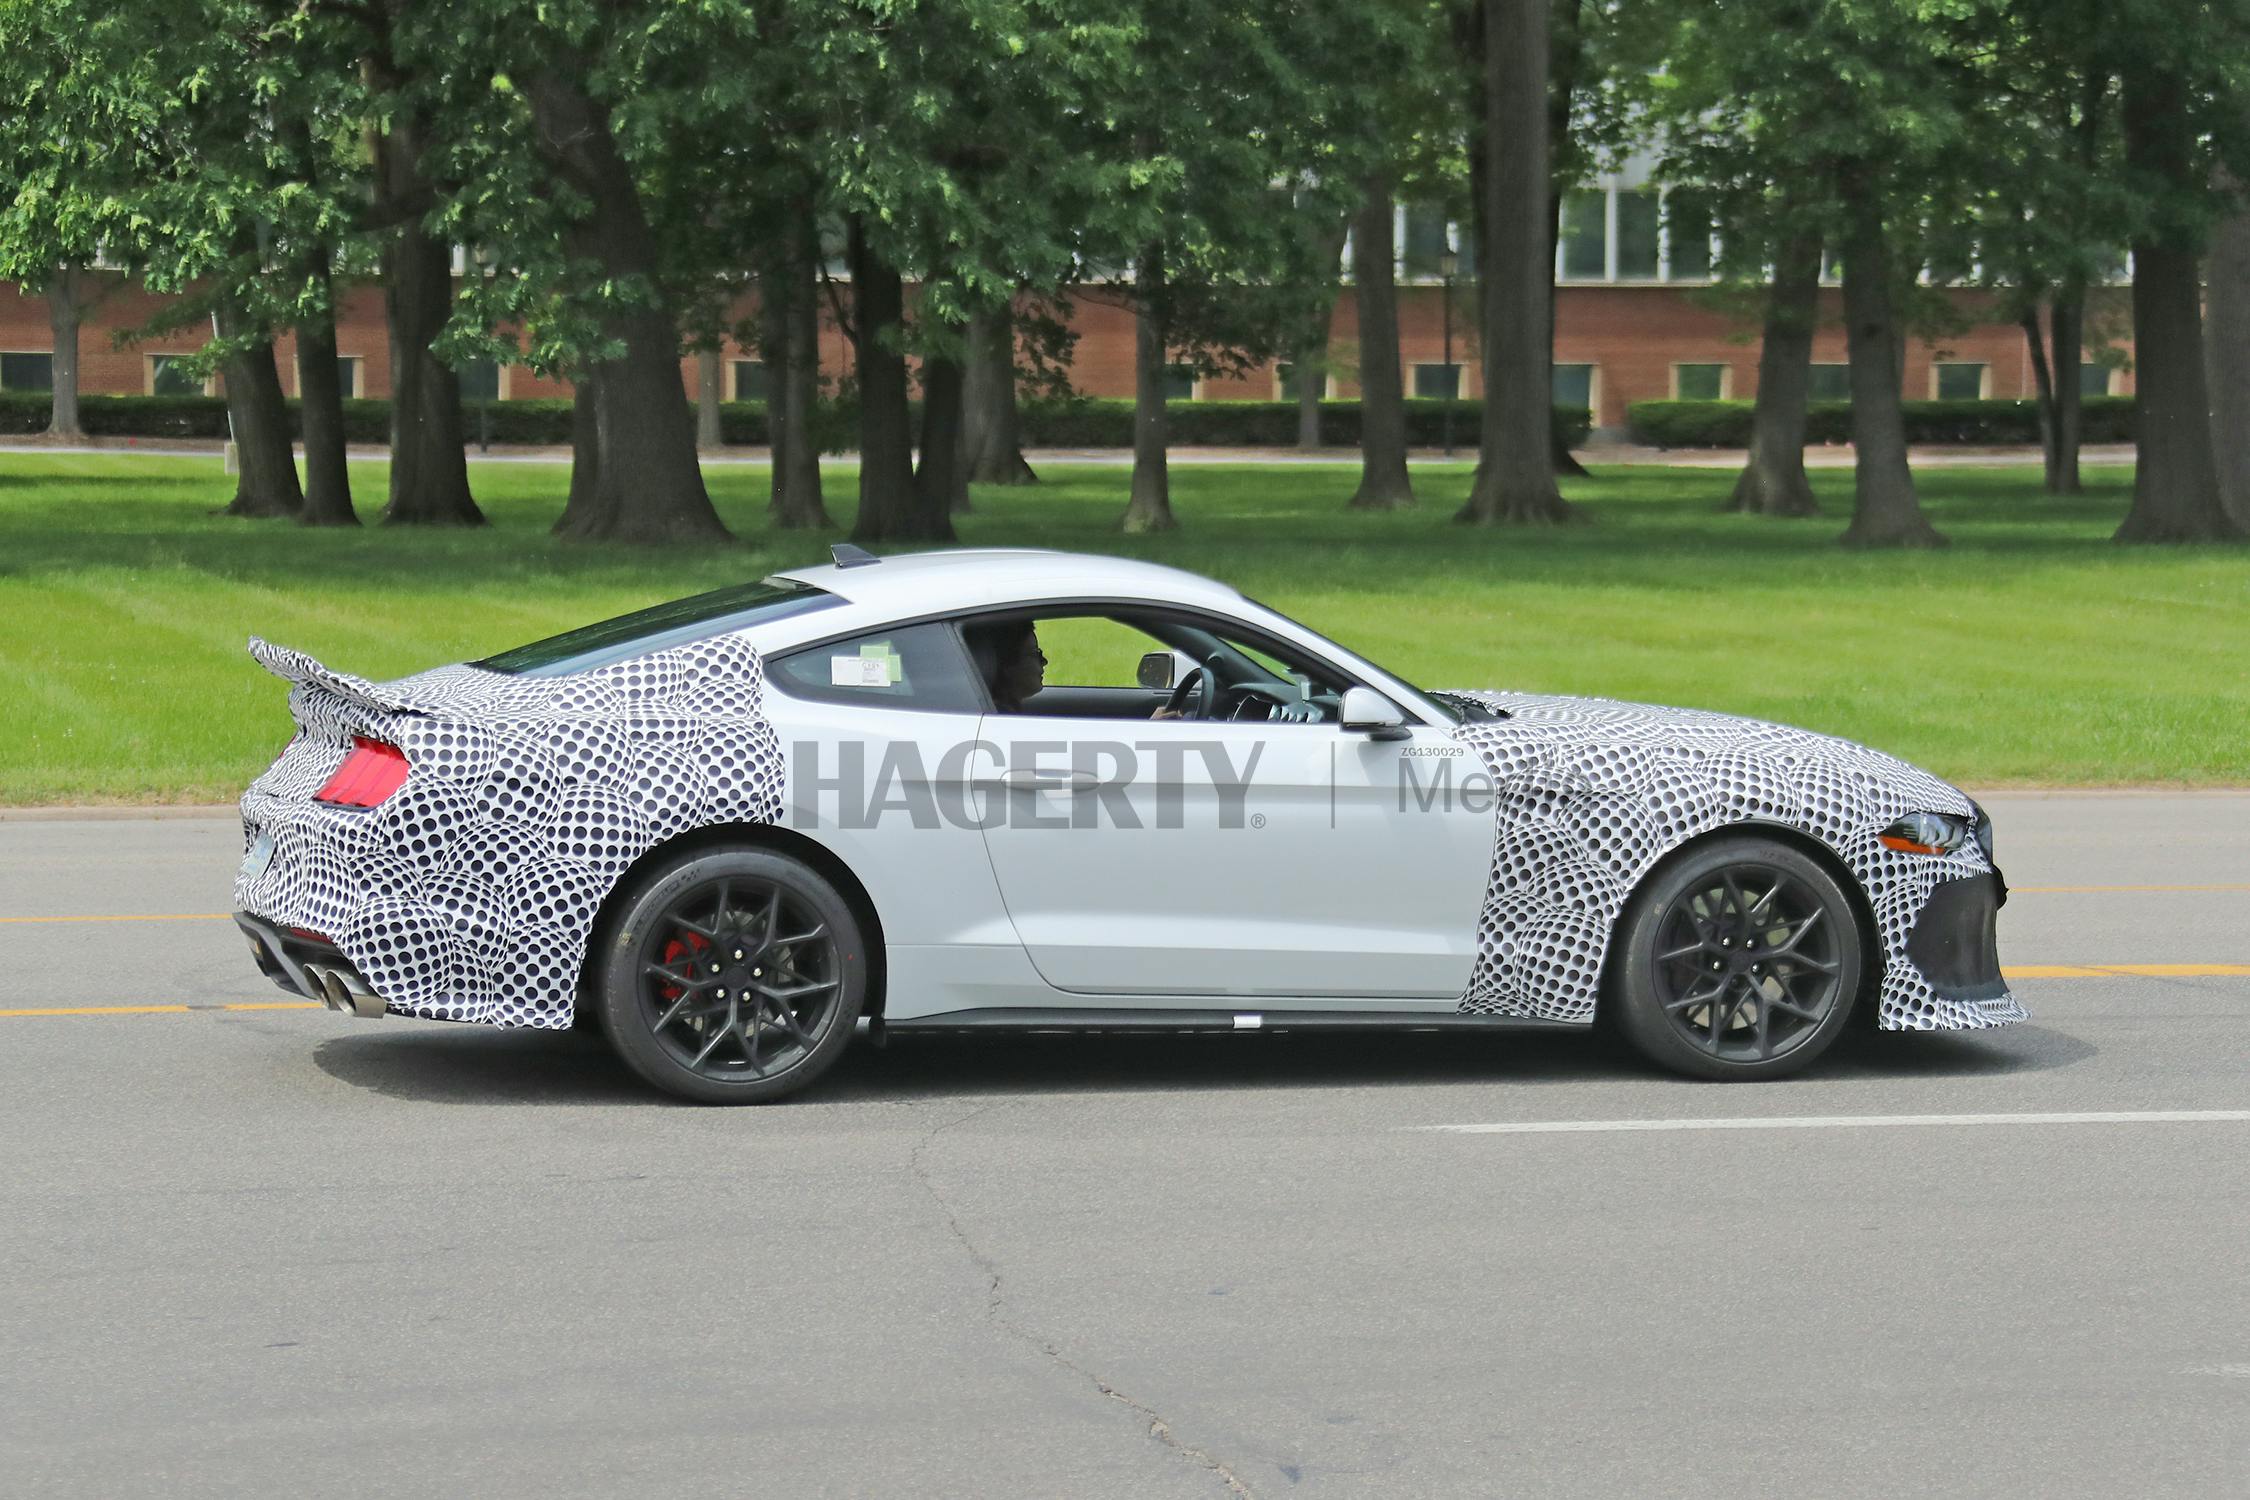 2021 Ford Mustang Mach 1 Spy Photo